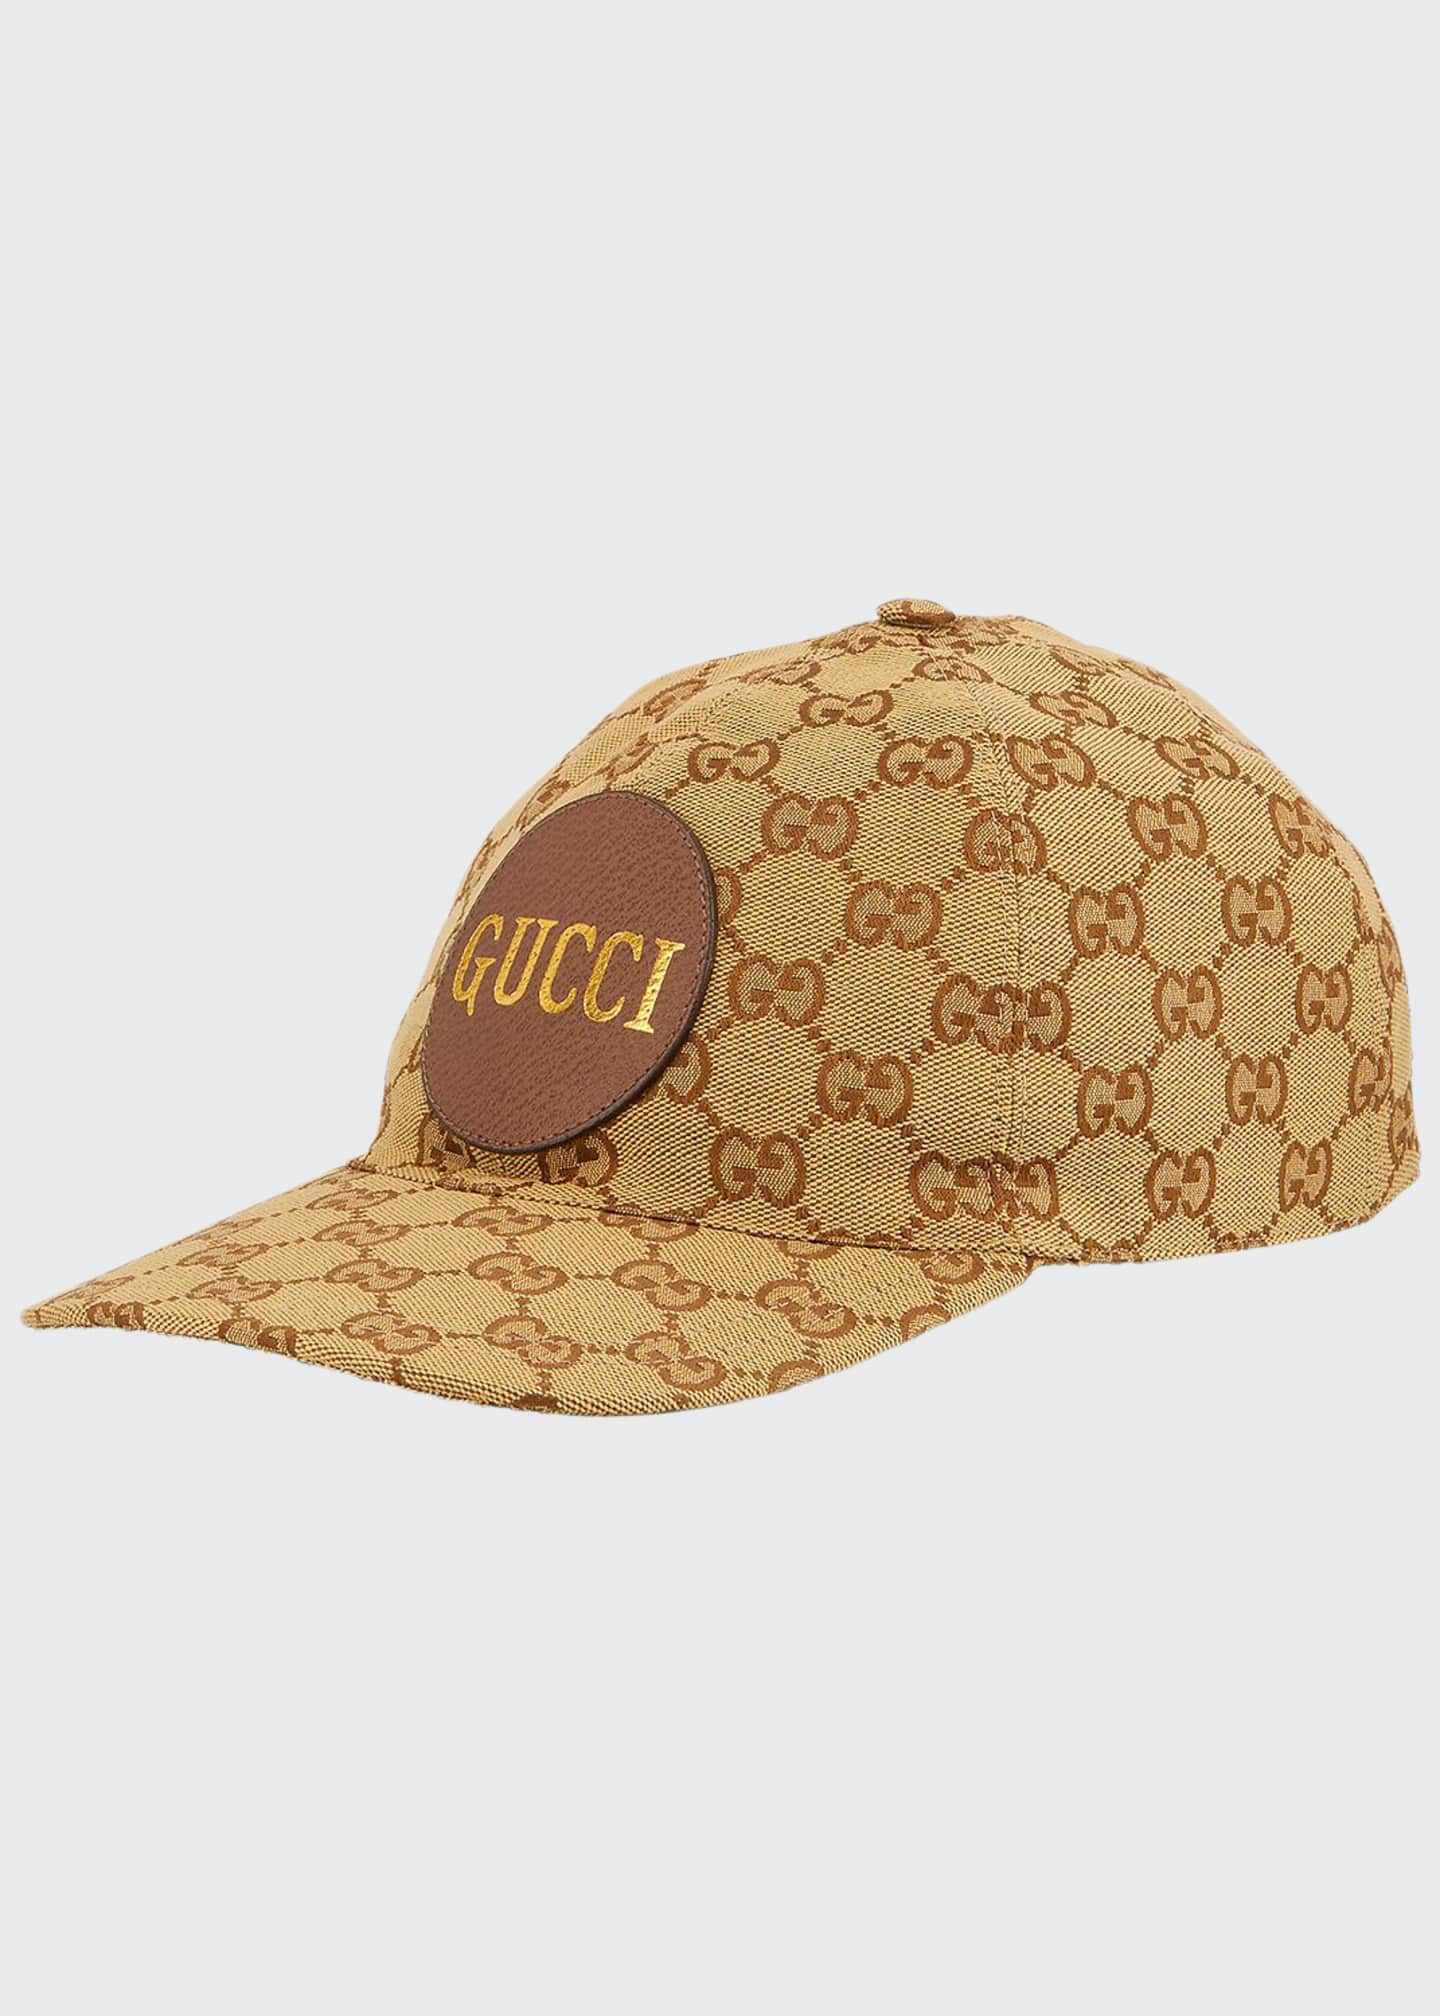 Gucci Canvas Baseball Hat w/ Floral Embroidery